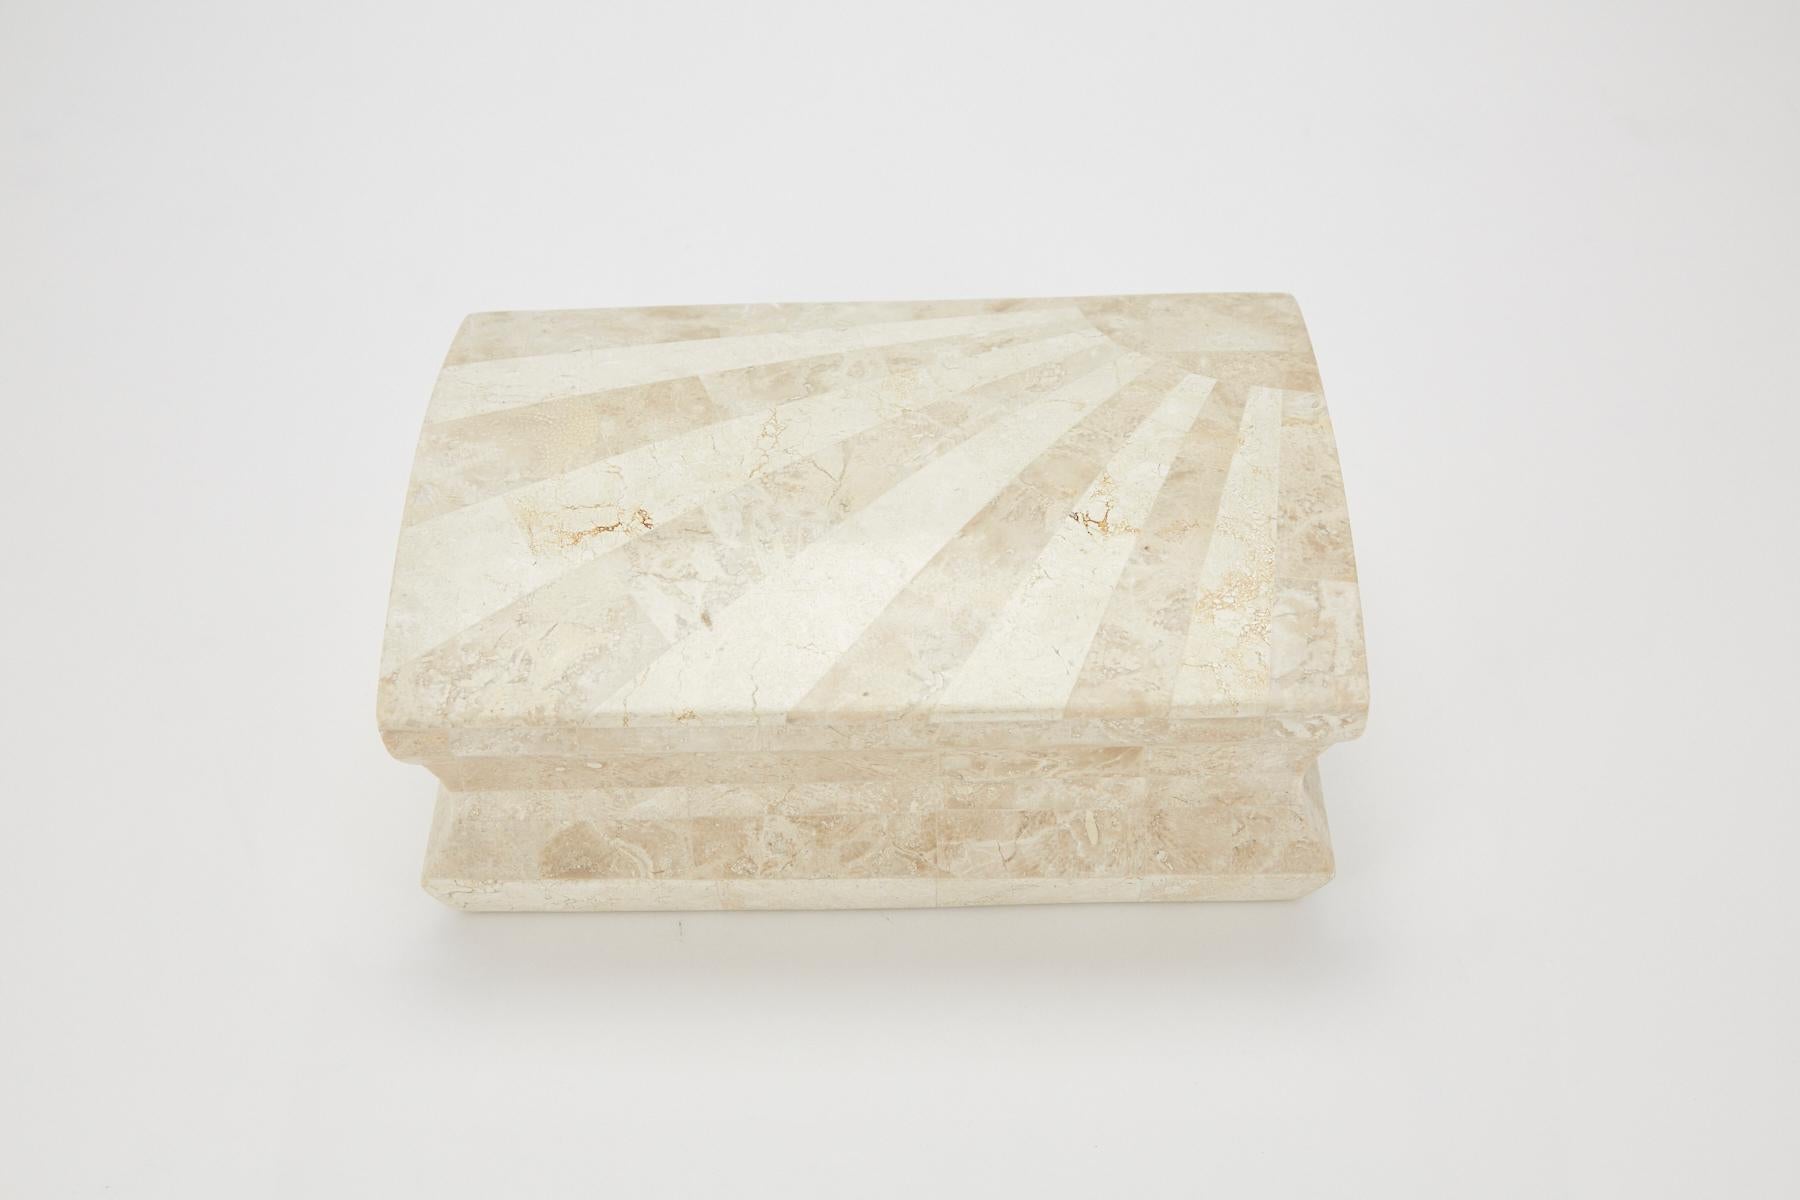 Large hinged decorative box or tea caddy. Exterior completely covered in two-tone tessellated white stone and beige fossil stone in a starburst pattern across the top. Interior of box lined in wood.